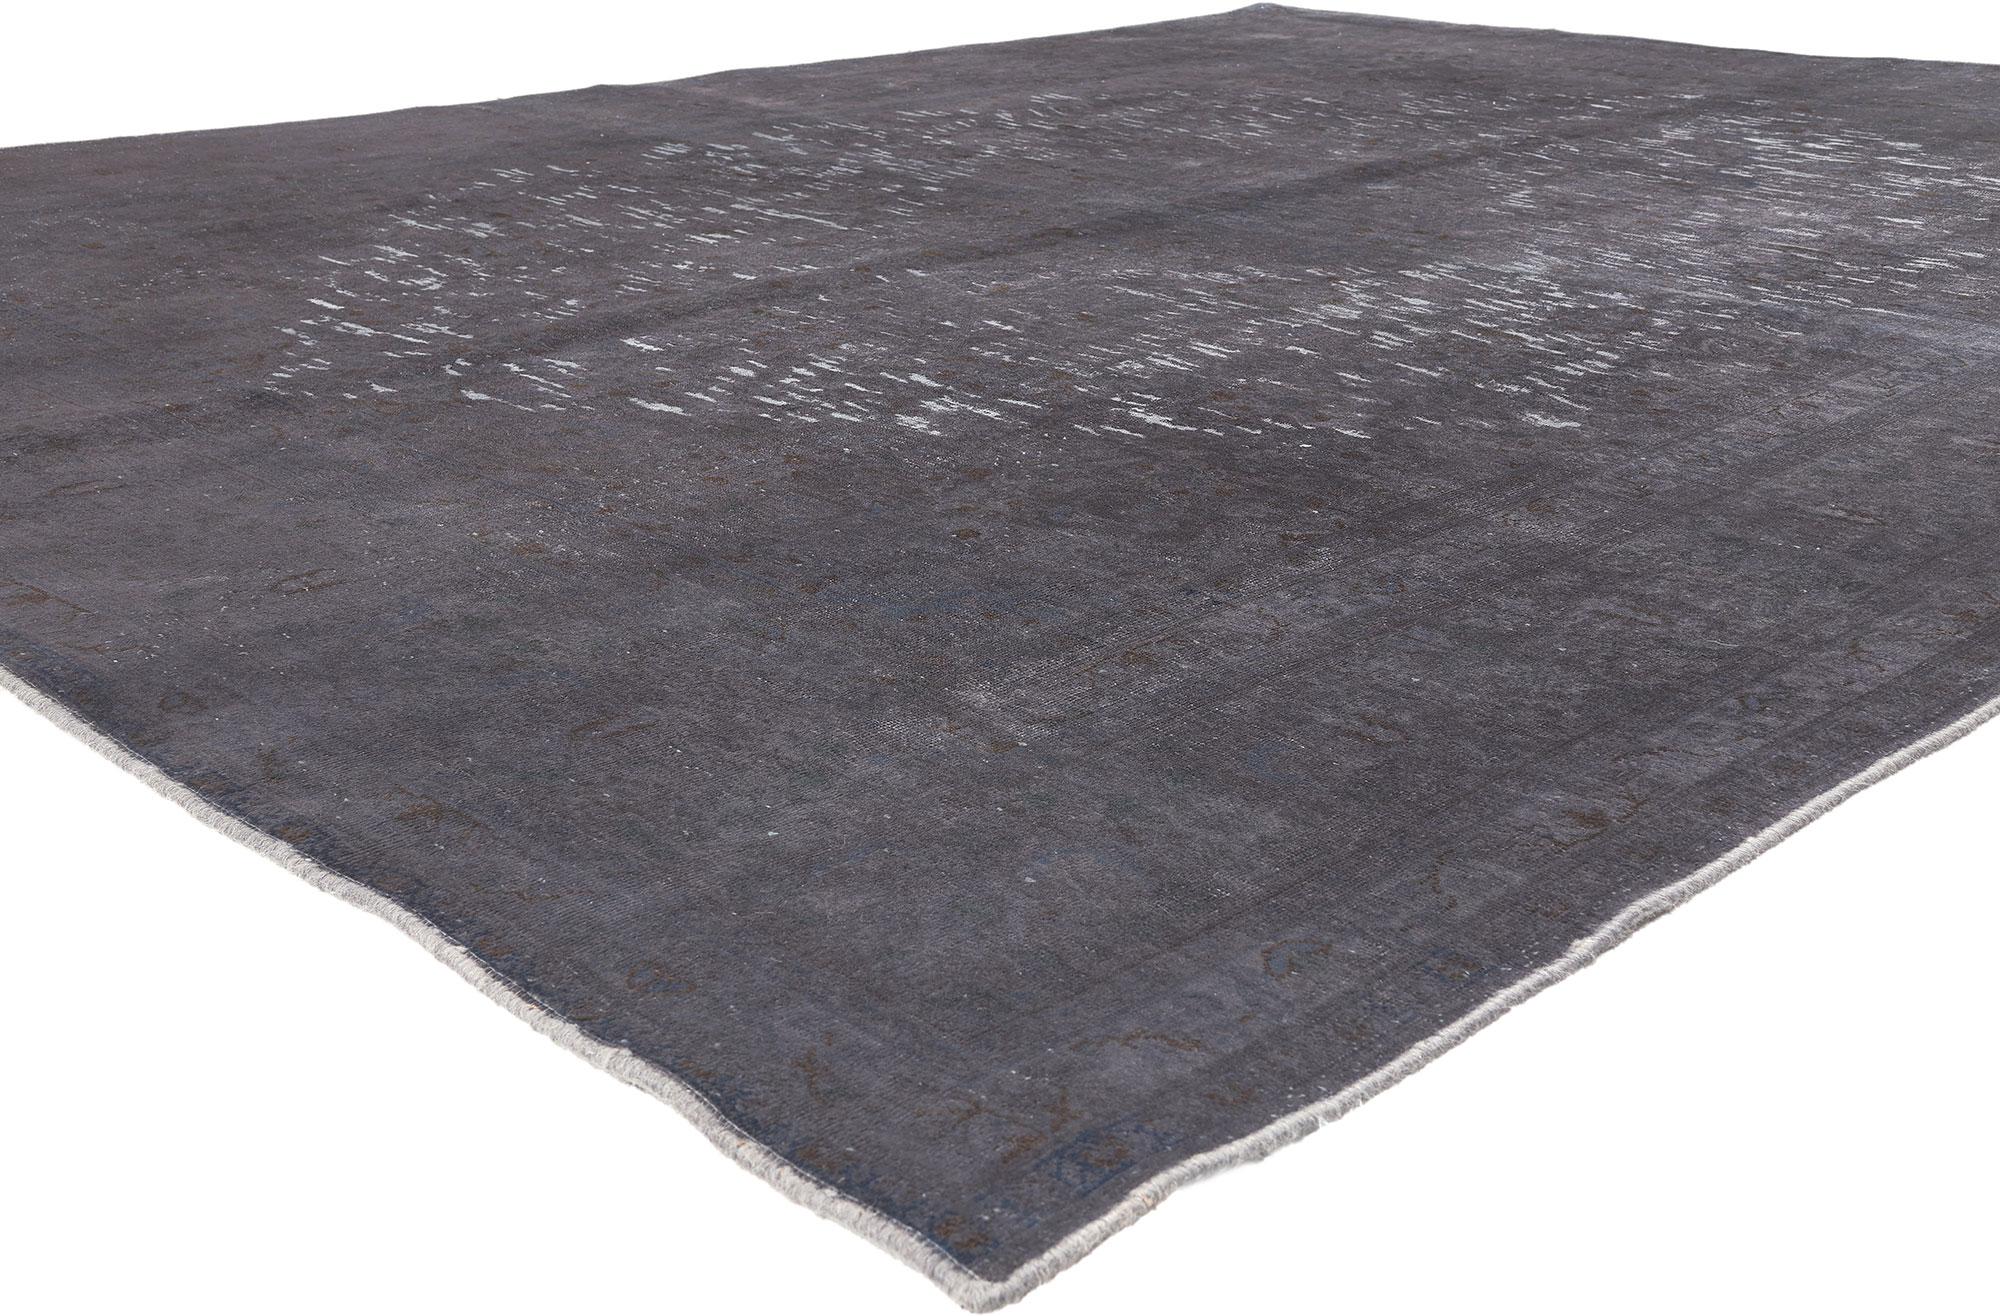 60774 Vintage Turkish Overdyed Rug, 09'06 x 12'08.
Prepare to be charmed by a hand knotted wool vintage Turkish overdyed rug that's as paradoxical as it is alluring. This overdyed gray area rug takes remnants of traditional forms and gives them a